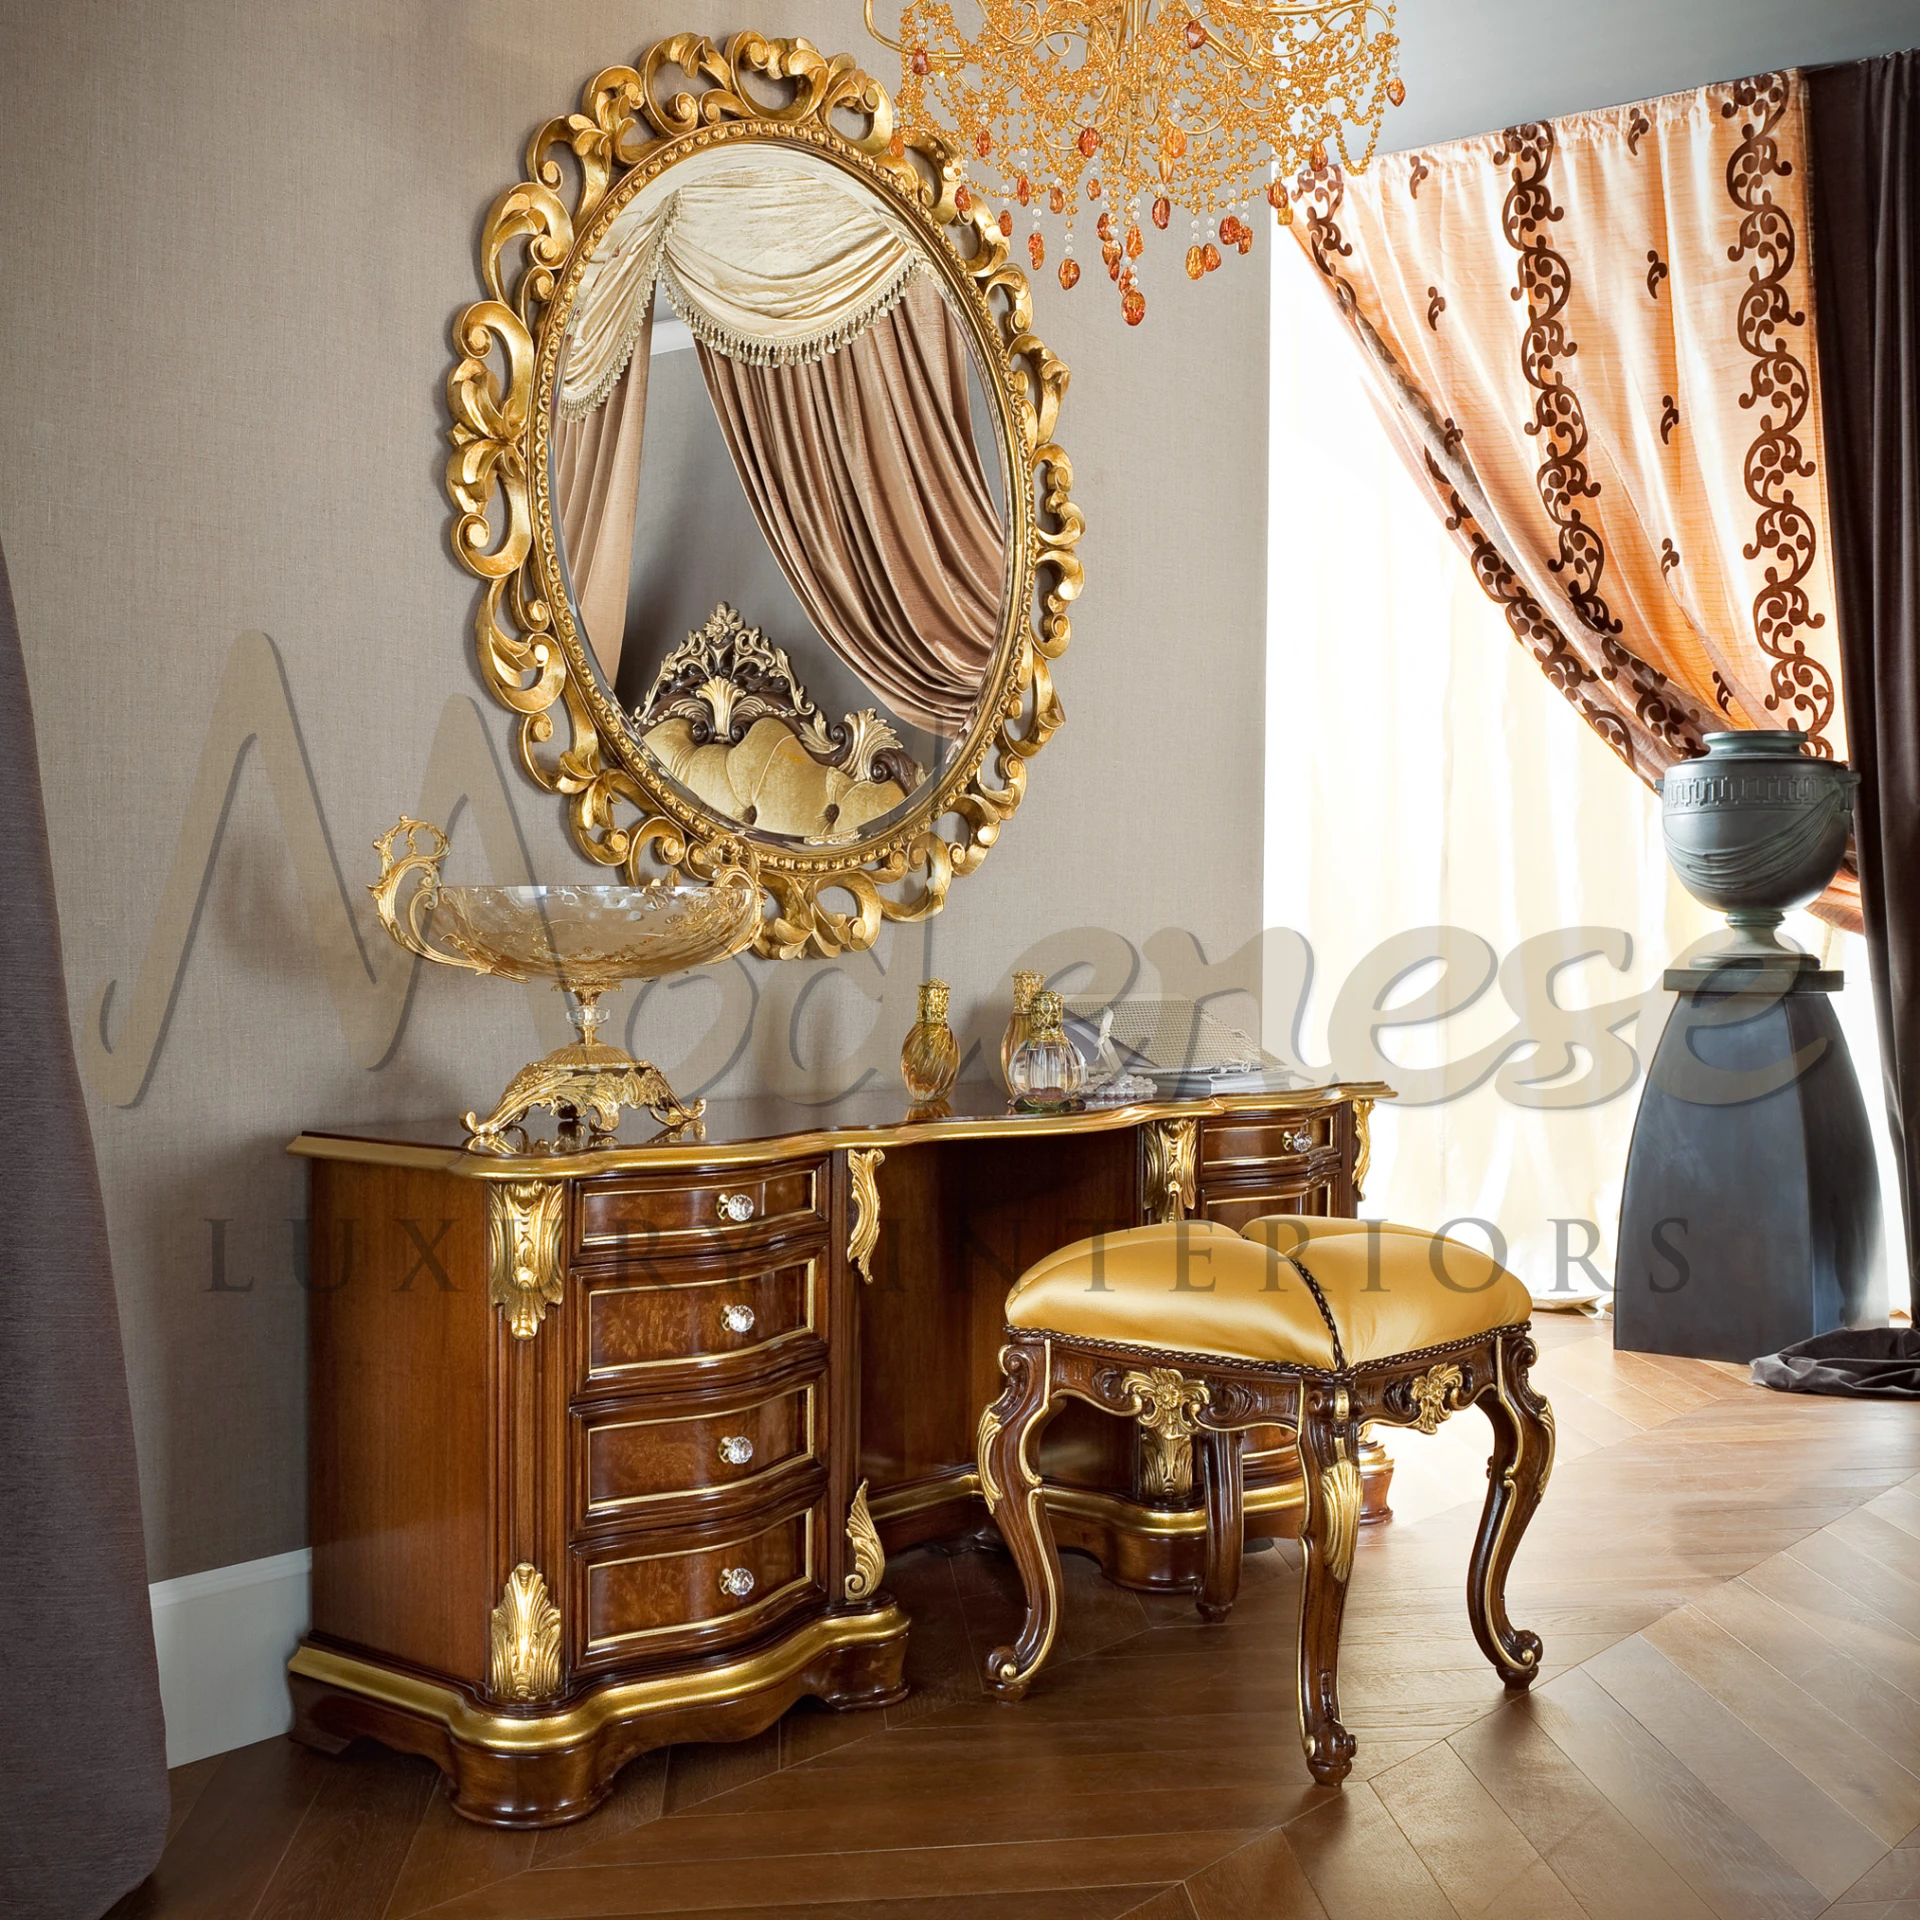 Opulent mahogany dressing table with gold leaf accents, multiple drawers, and a matching stool with golden upholstery, adorned with a decorative gold-rimmed bowl and perfume bottles.